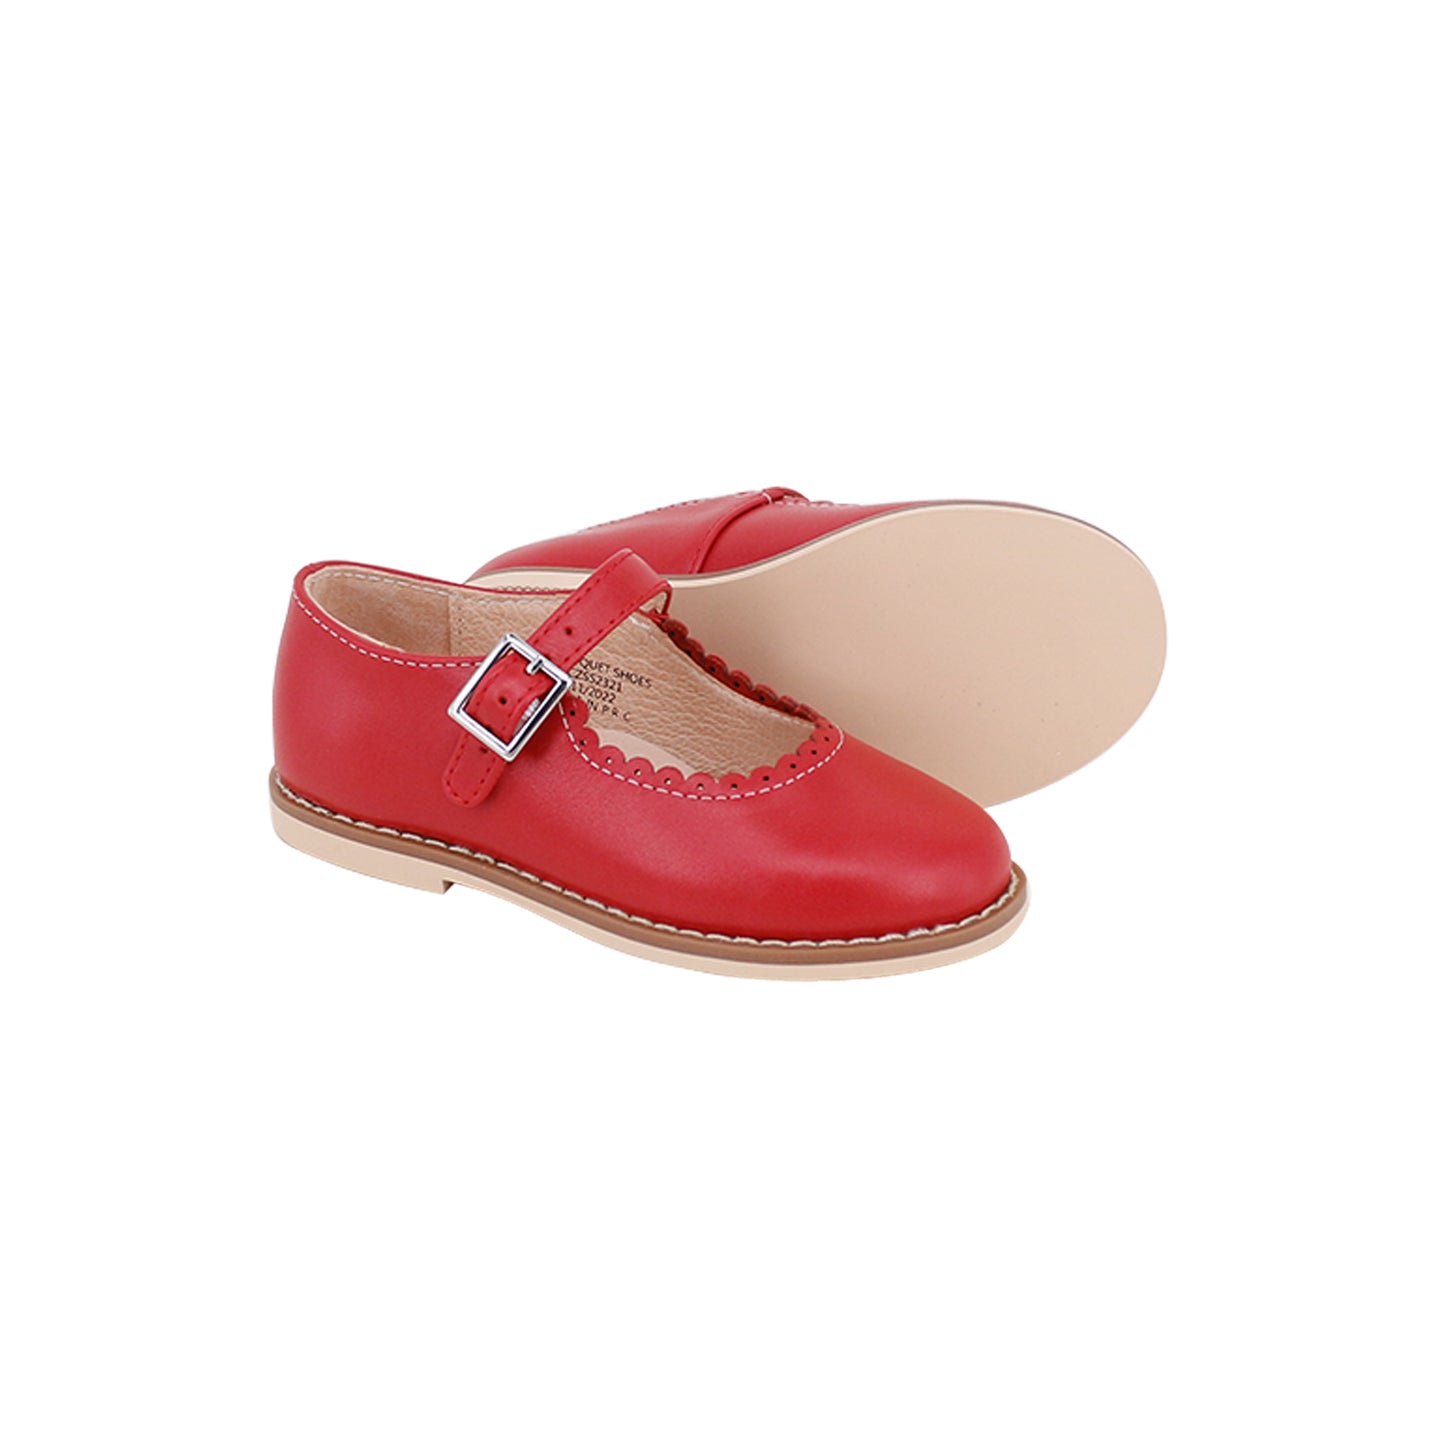 PERROQUET RED LEATHER SCALLOPED MARY JANE